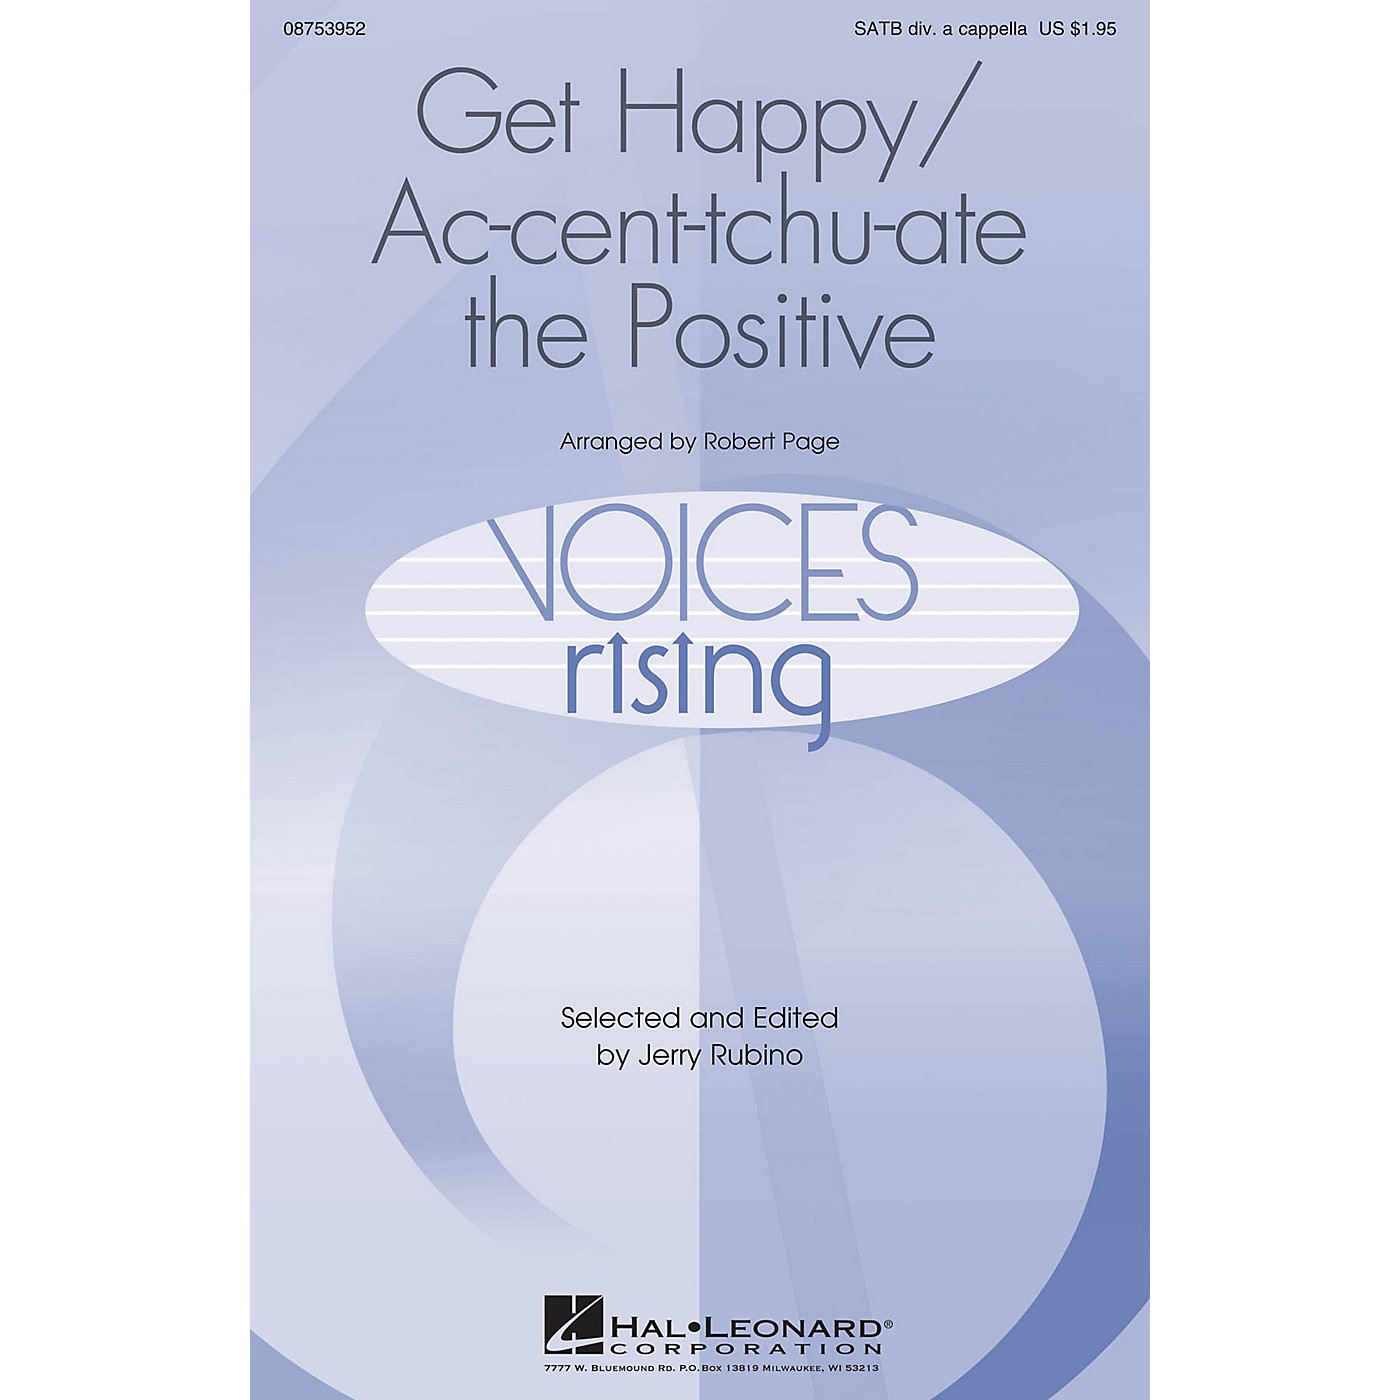 Hal Leonard Get Happy/Ac-cent-tchu-ate the Positive SATB DV A Cappella arranged by Robert Page thumbnail